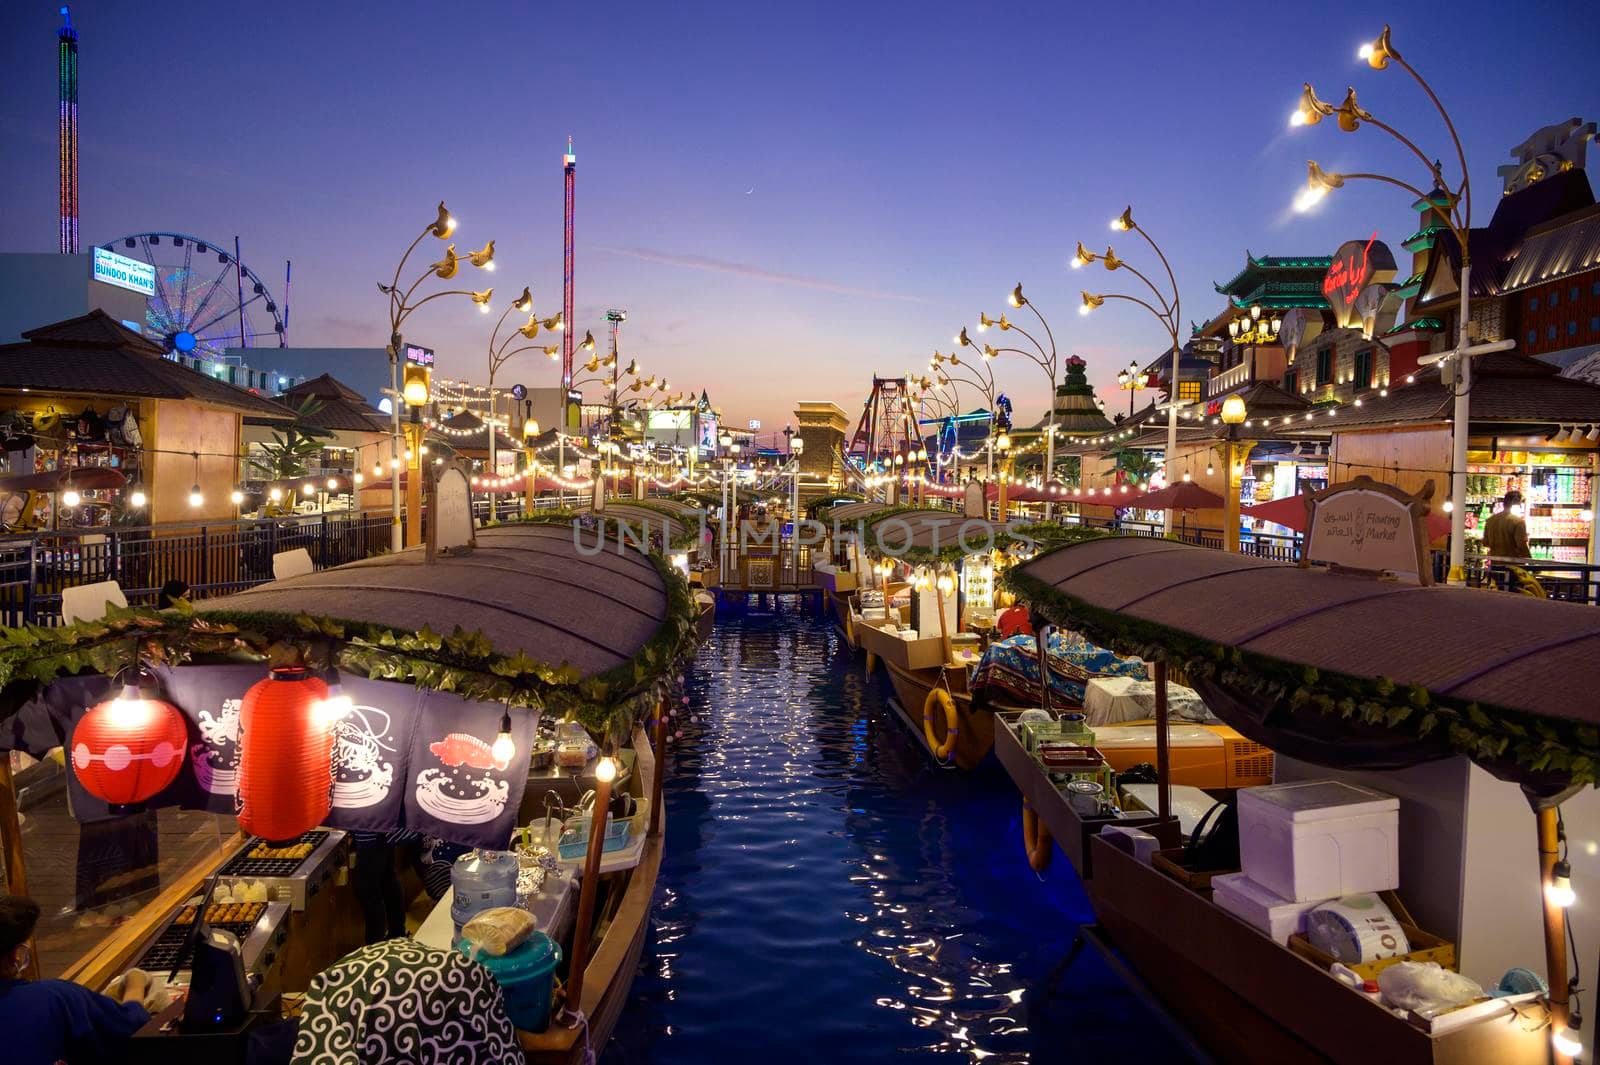 Dubai UAE, DEC 16 2020 Beautiful view of the Bangkok floating markets selling exotic Thai food in the park entertainment center captured in the sunset time at The Global Village, Dubai ,UAE. by sriyapixels